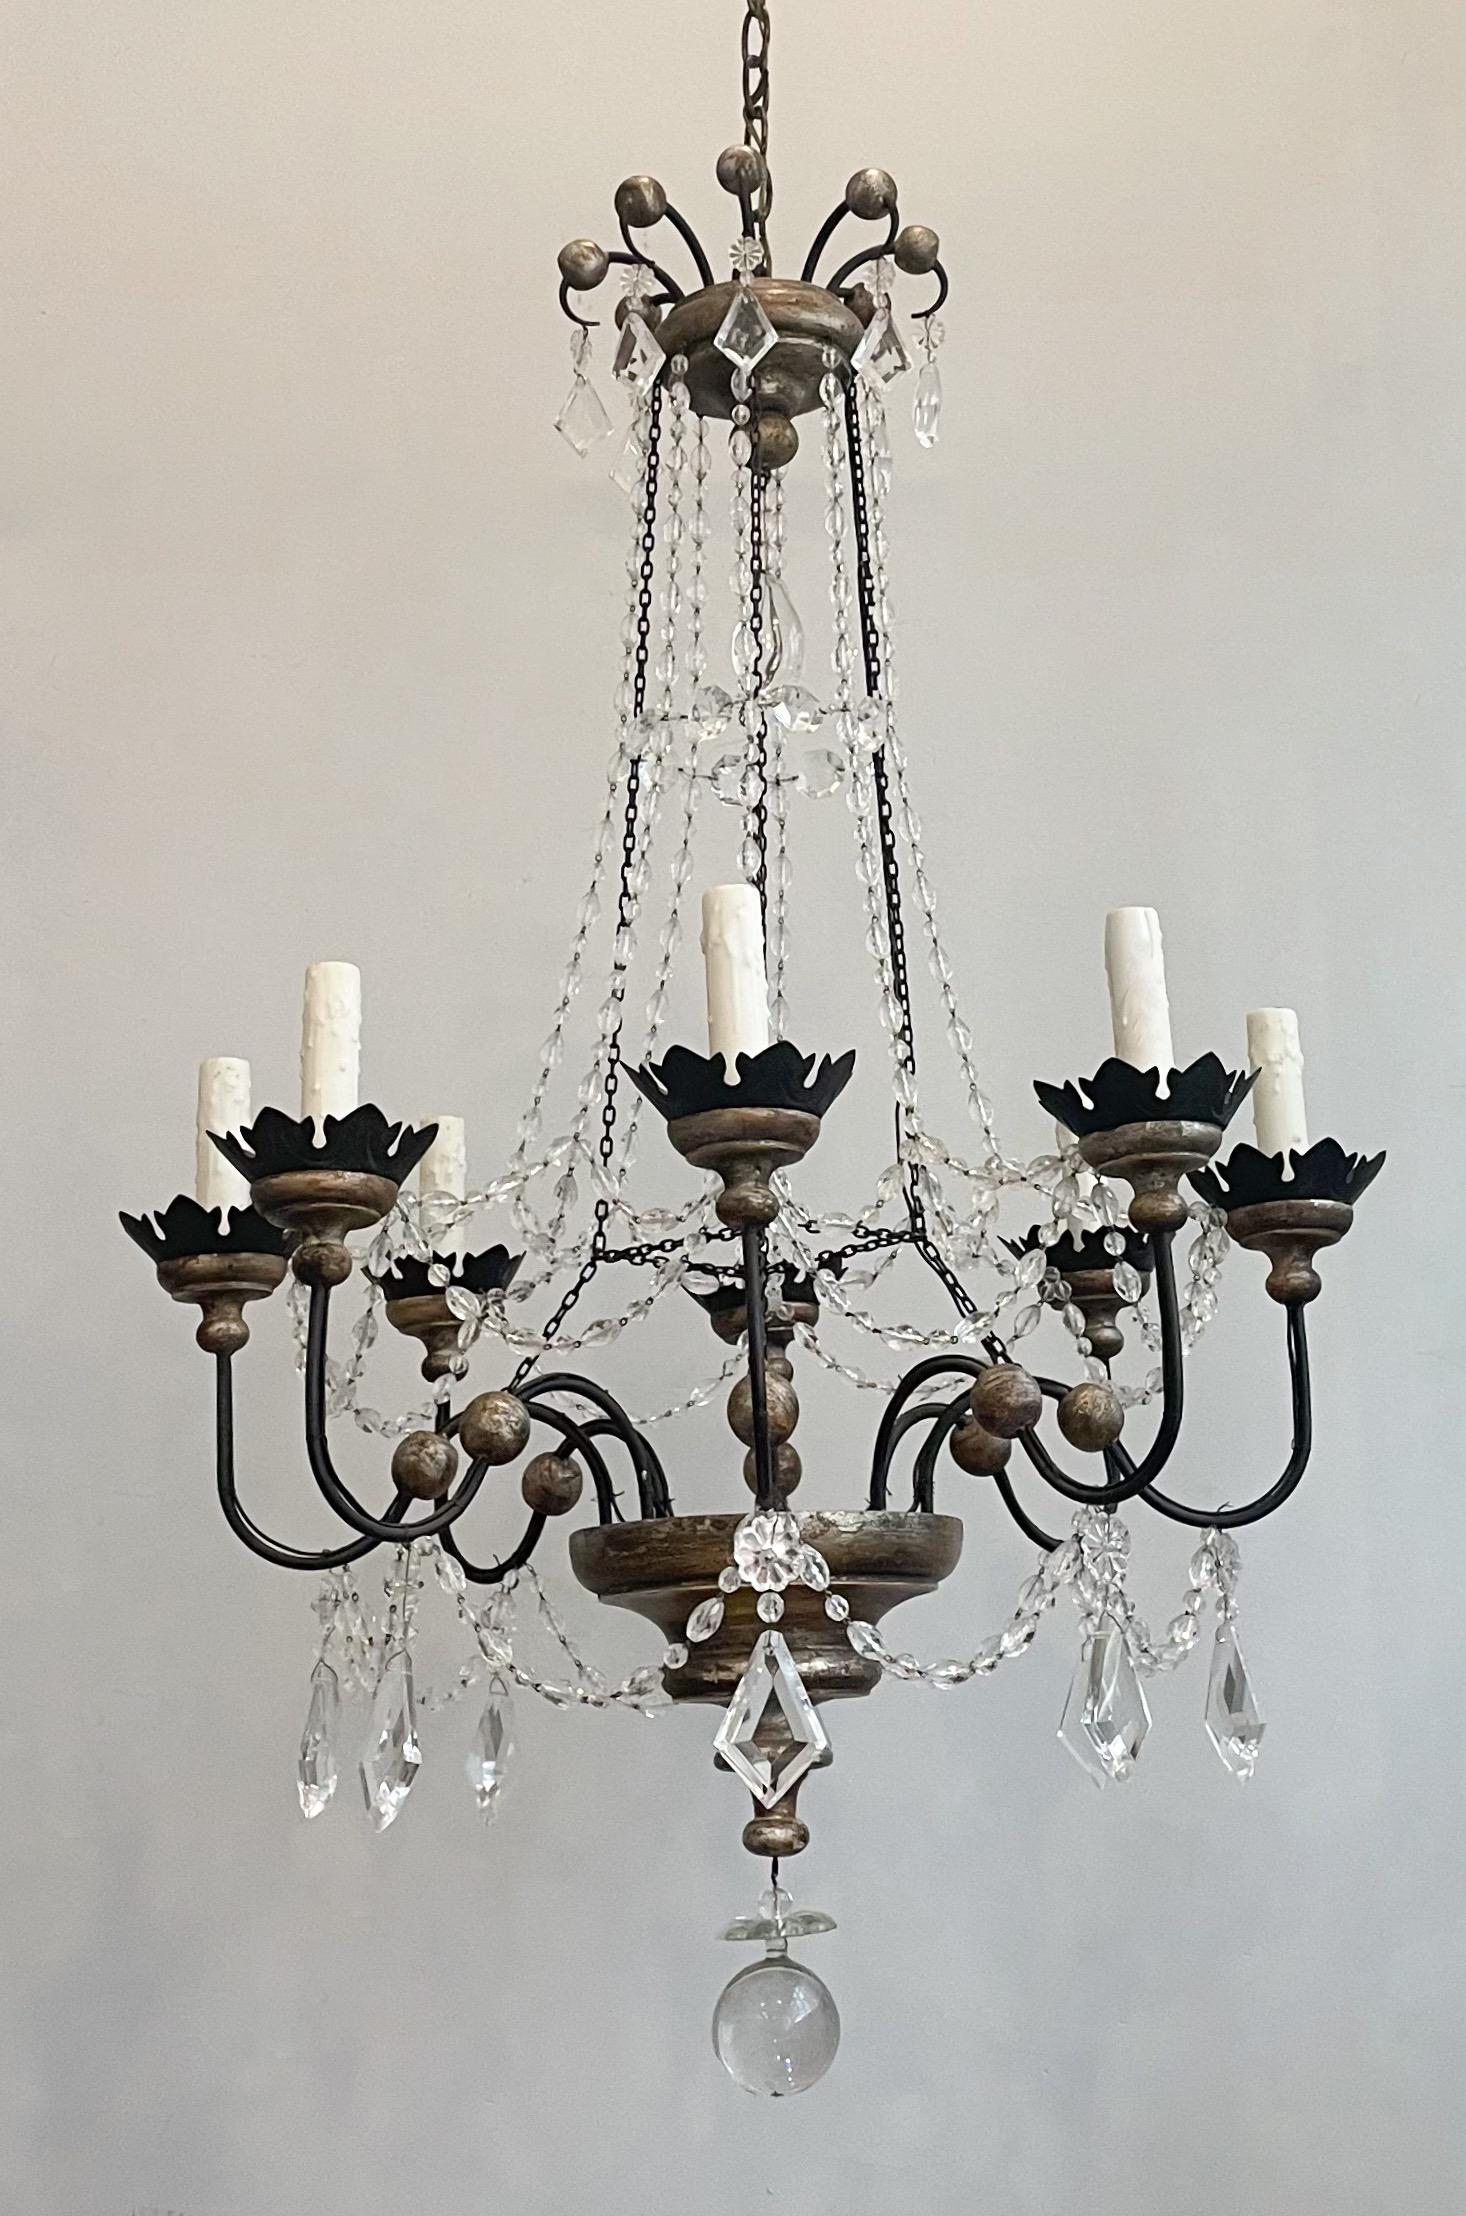 Gorgeous, Italian silver-leafed wood, iron and crystal chandelier.

The chandelier features a silvered wood base and top crown held together by metal chains and crystal bead strands. 

The chandelier is wired, and in working condition, it requires